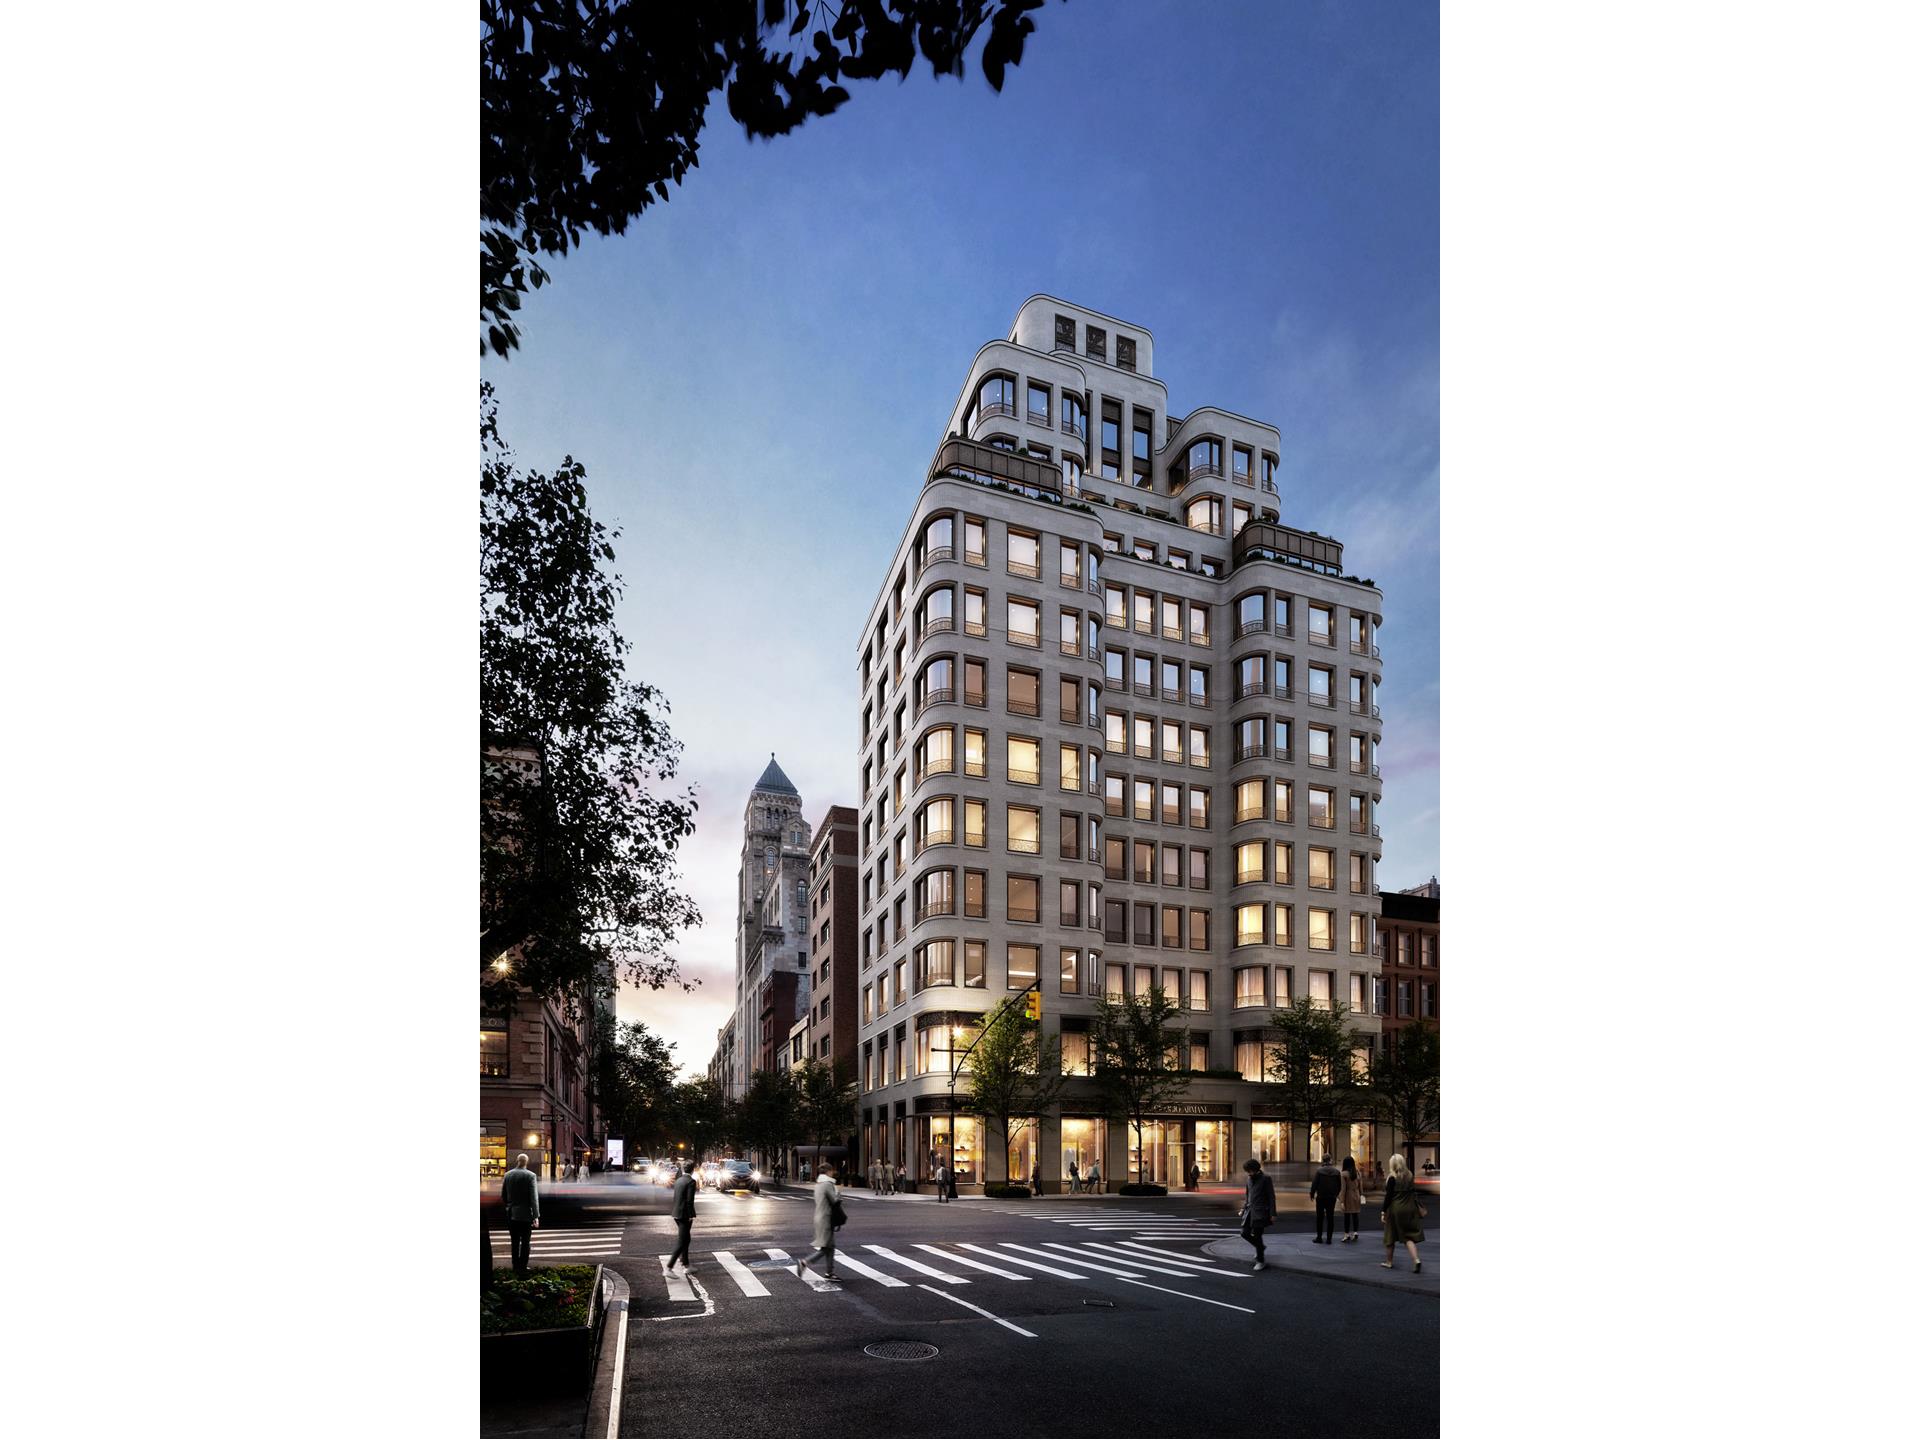 760 Madison Avenue 8, Lenox Hill, Upper East Side, NYC - 5 Bedrooms  5.5 Bathrooms  8 Rooms - 